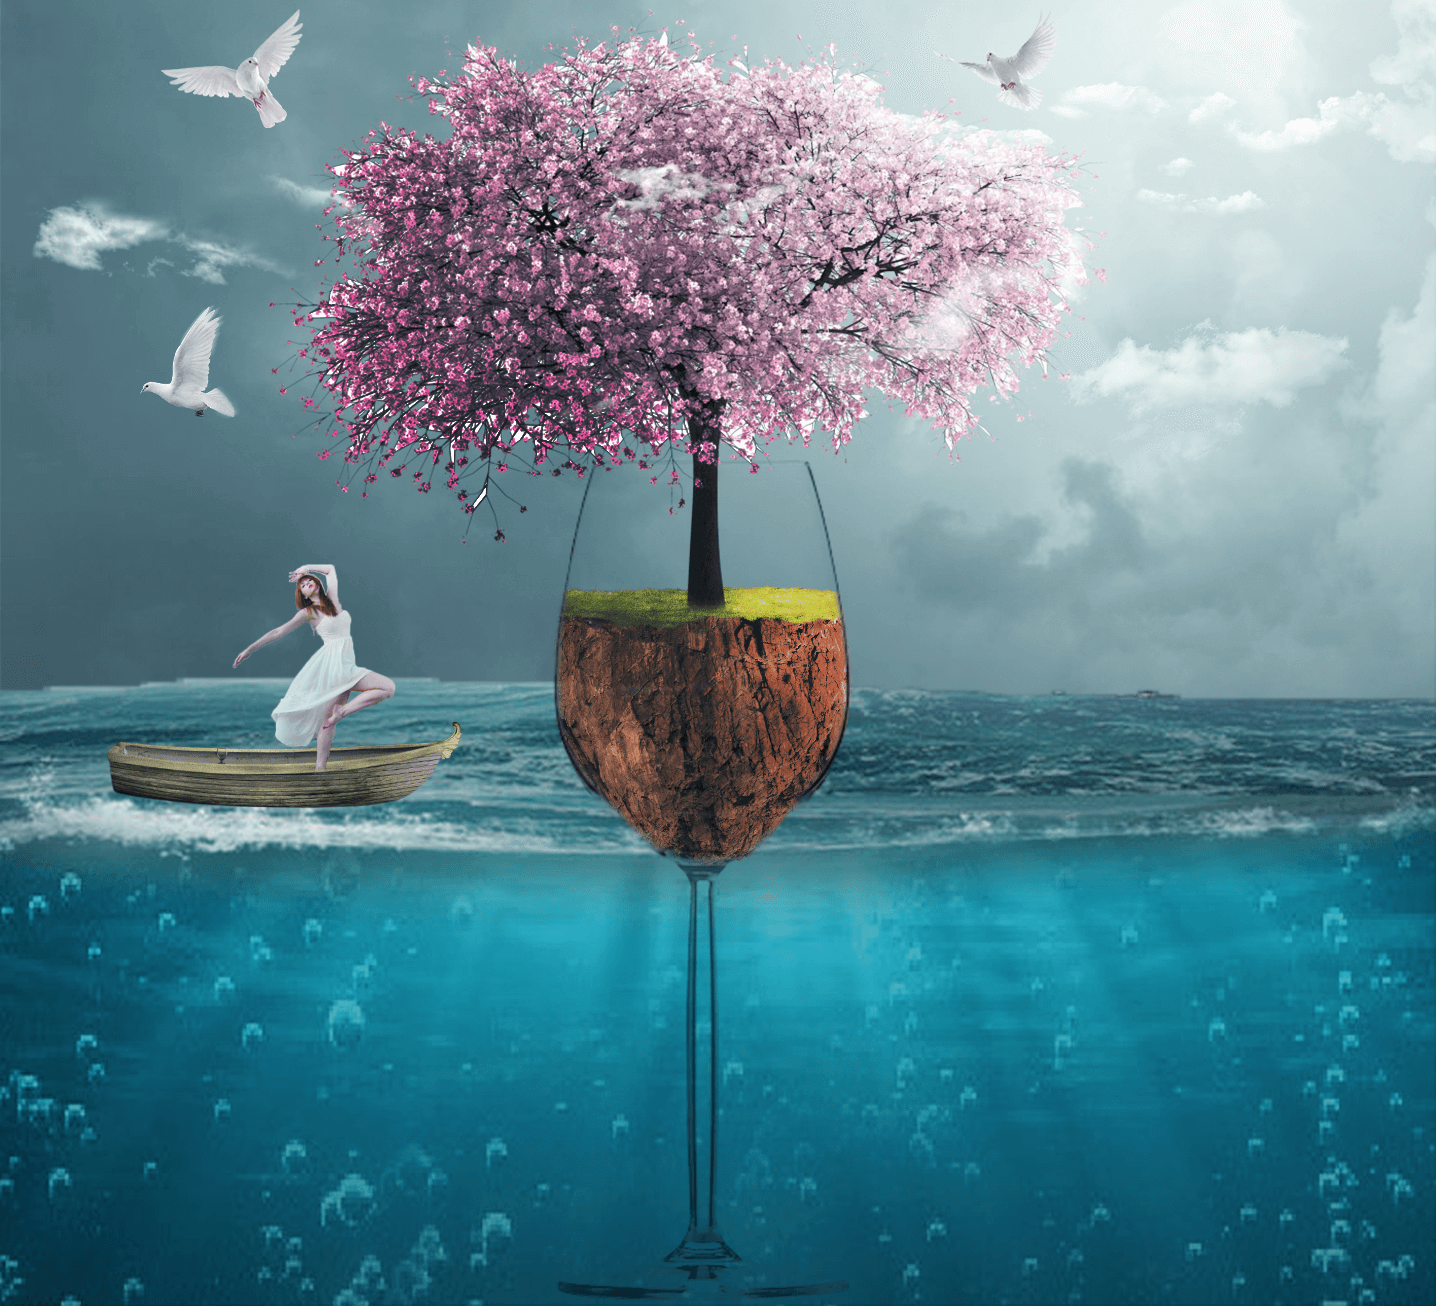 After: a wine glass filled with dirt and a cherry blossom tree in an ocean with doves in the air and a woman dancing on a boat